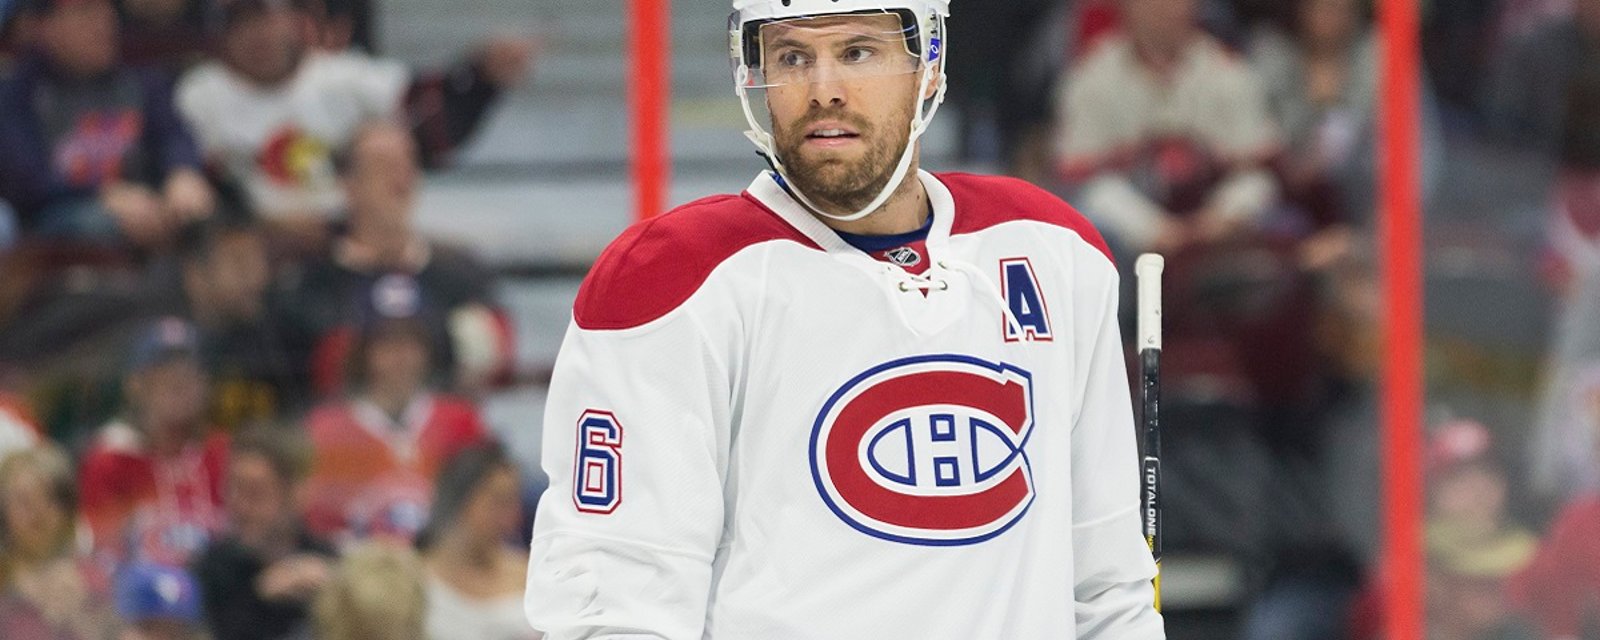 Breaking: Shea Weber makes shocking comments about the current state of the Habs.